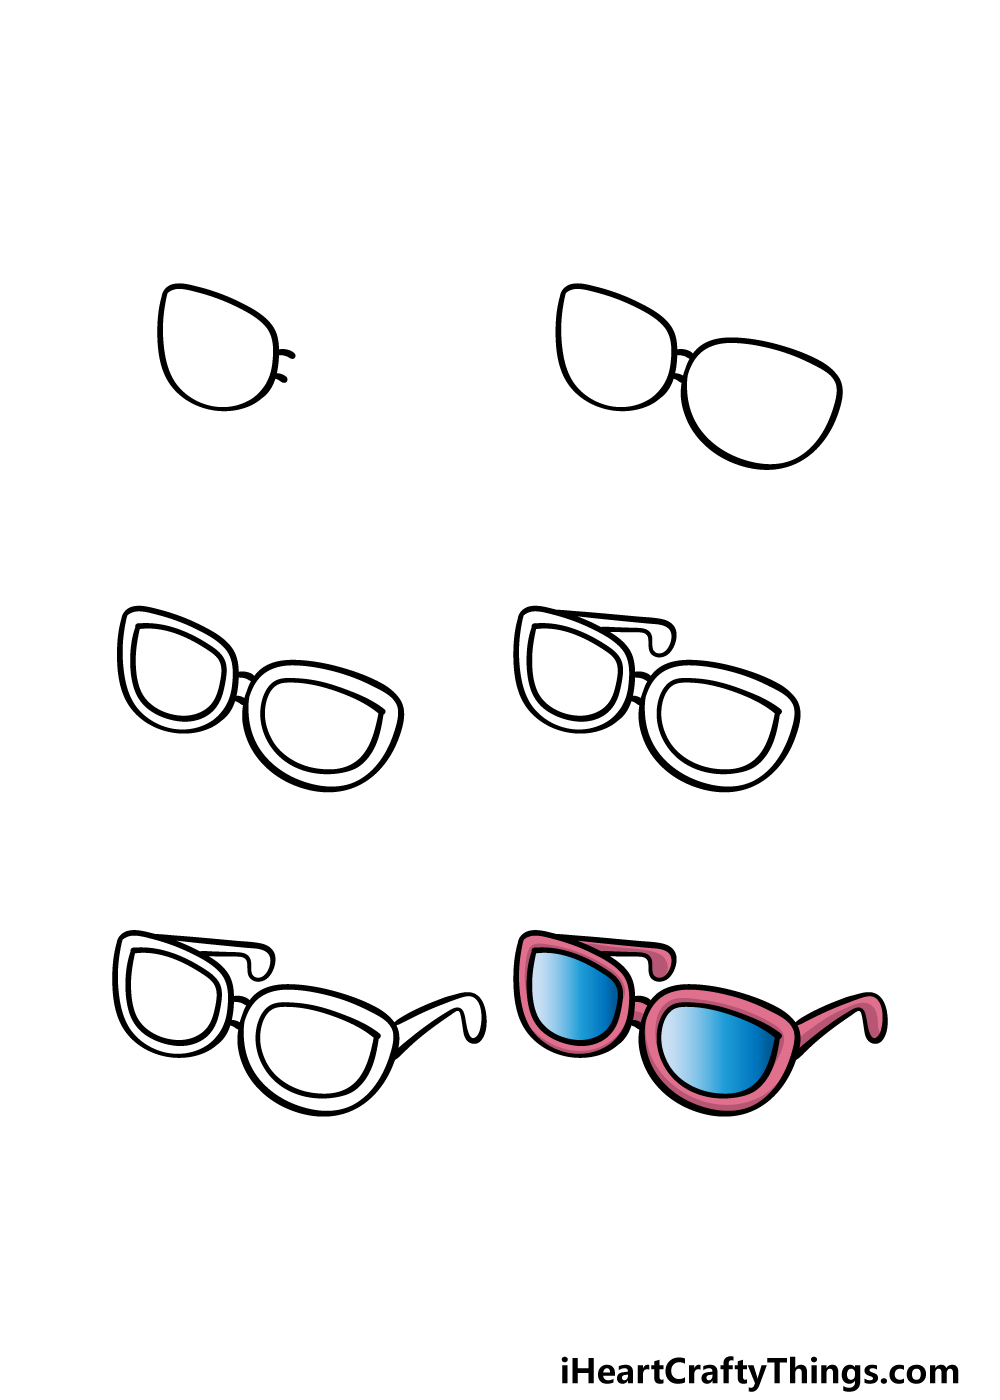 how to draw cartoon sunglasses in 6 steps